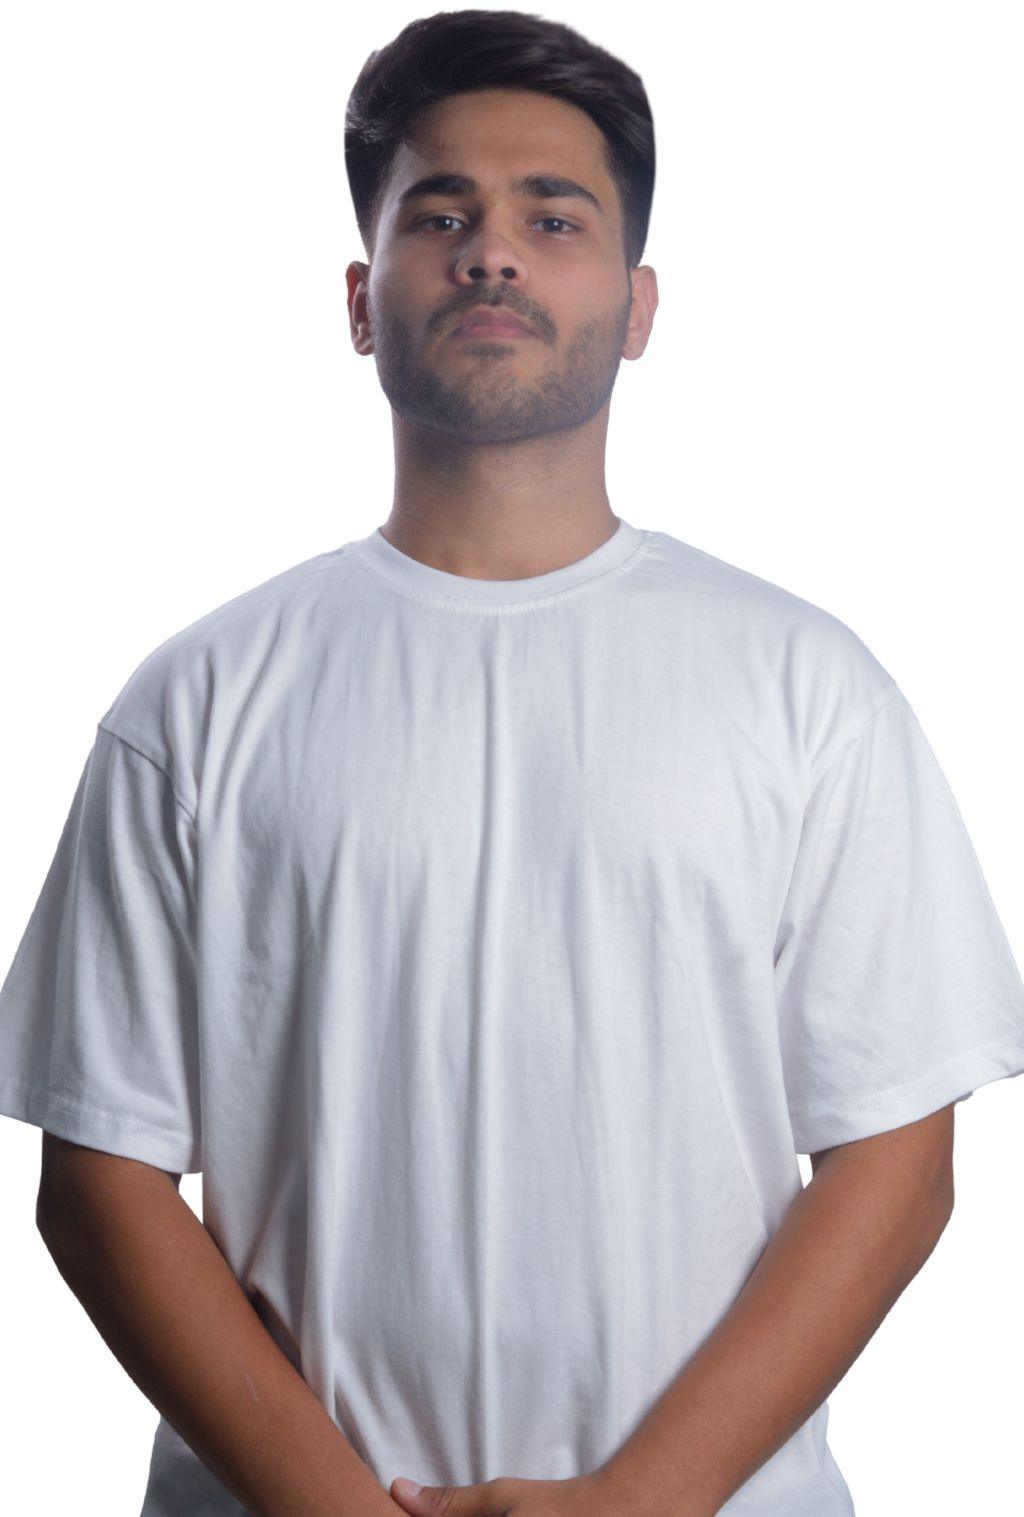 SOLID WHITE T-SHIRT | Quirky Vibe - Quirky Vibe India